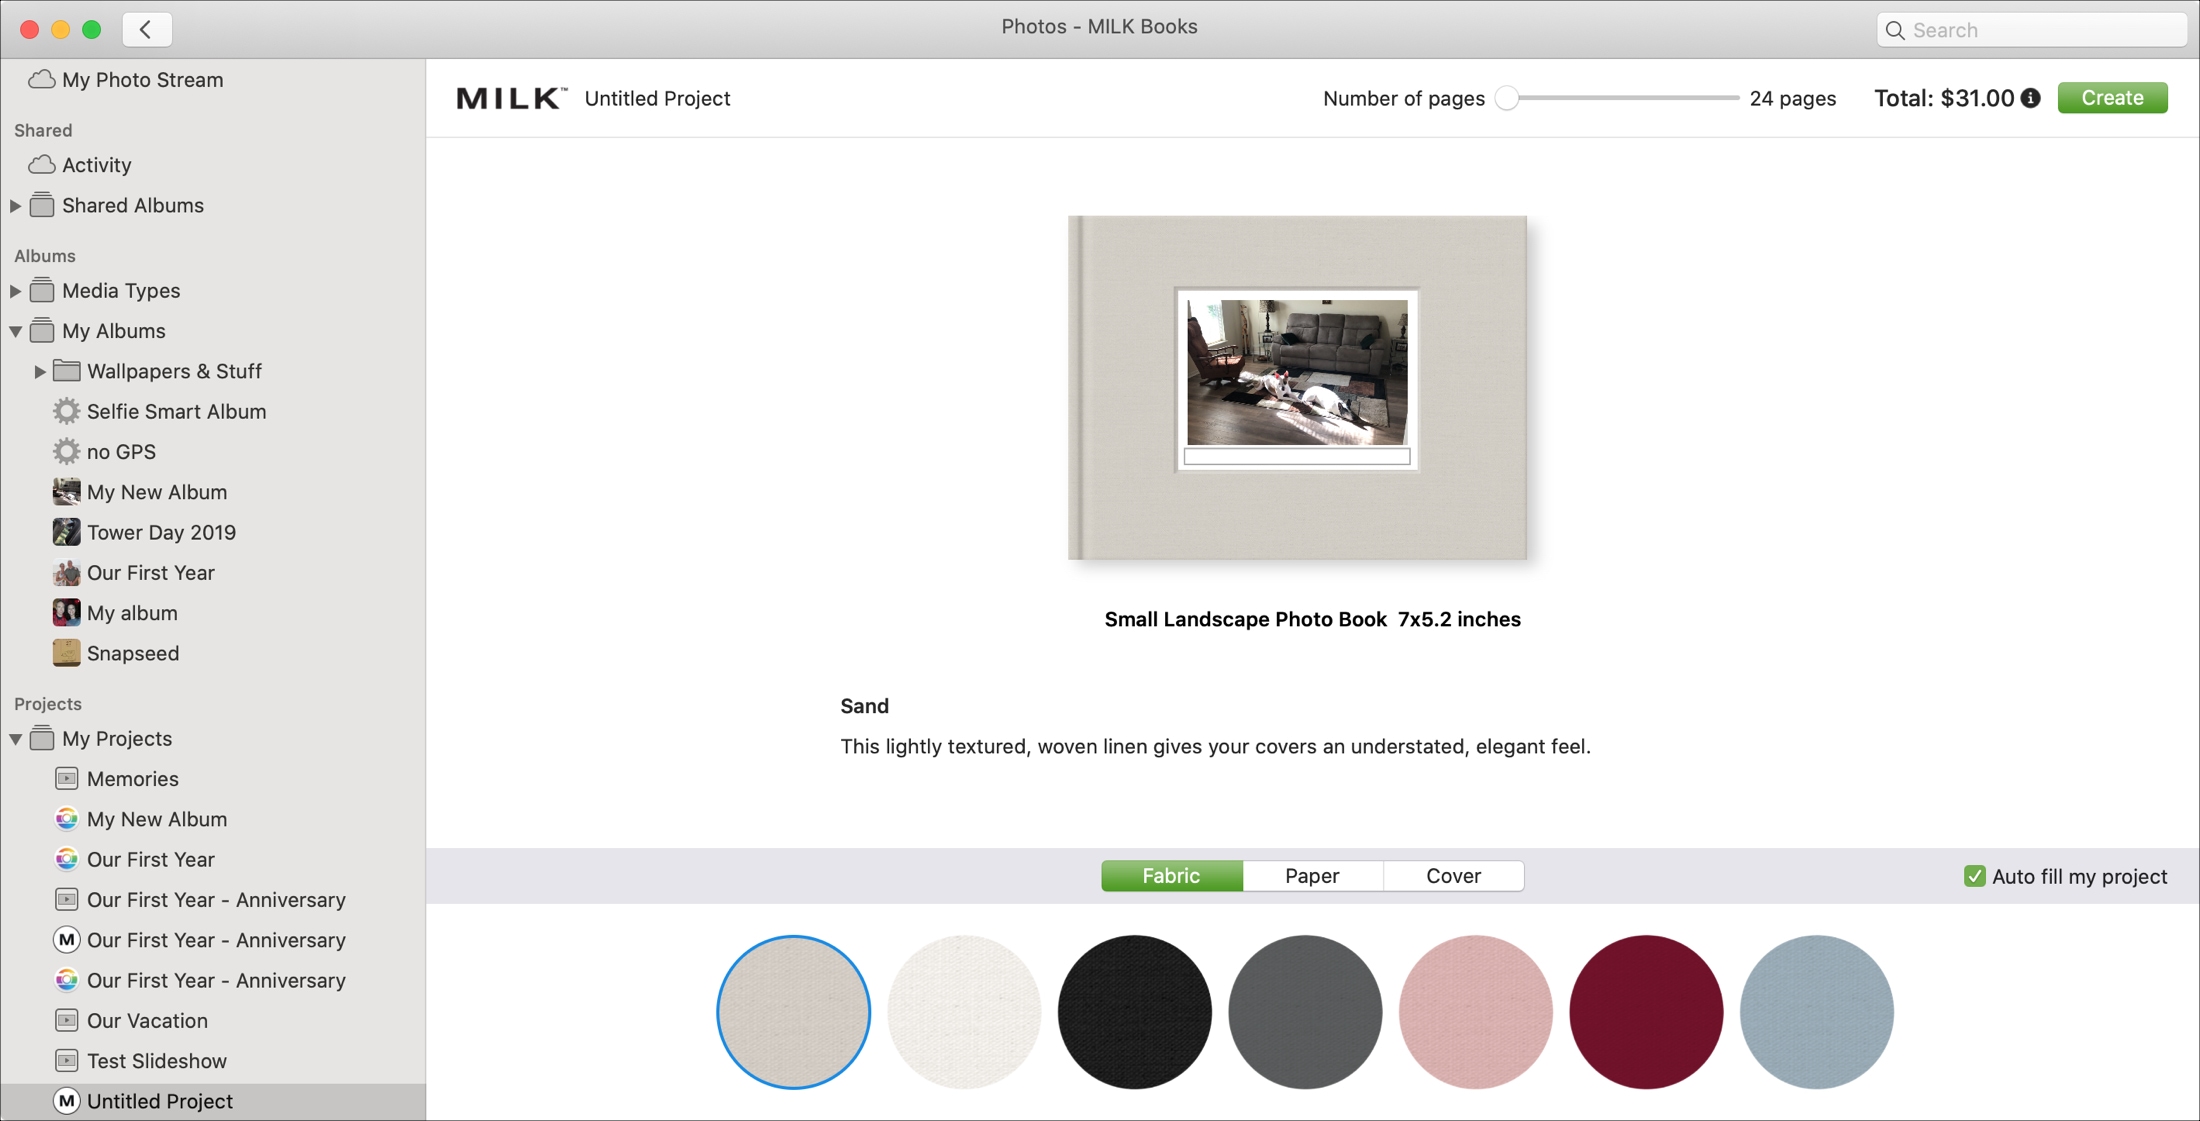 Extensions for Photos on Mac - MILK